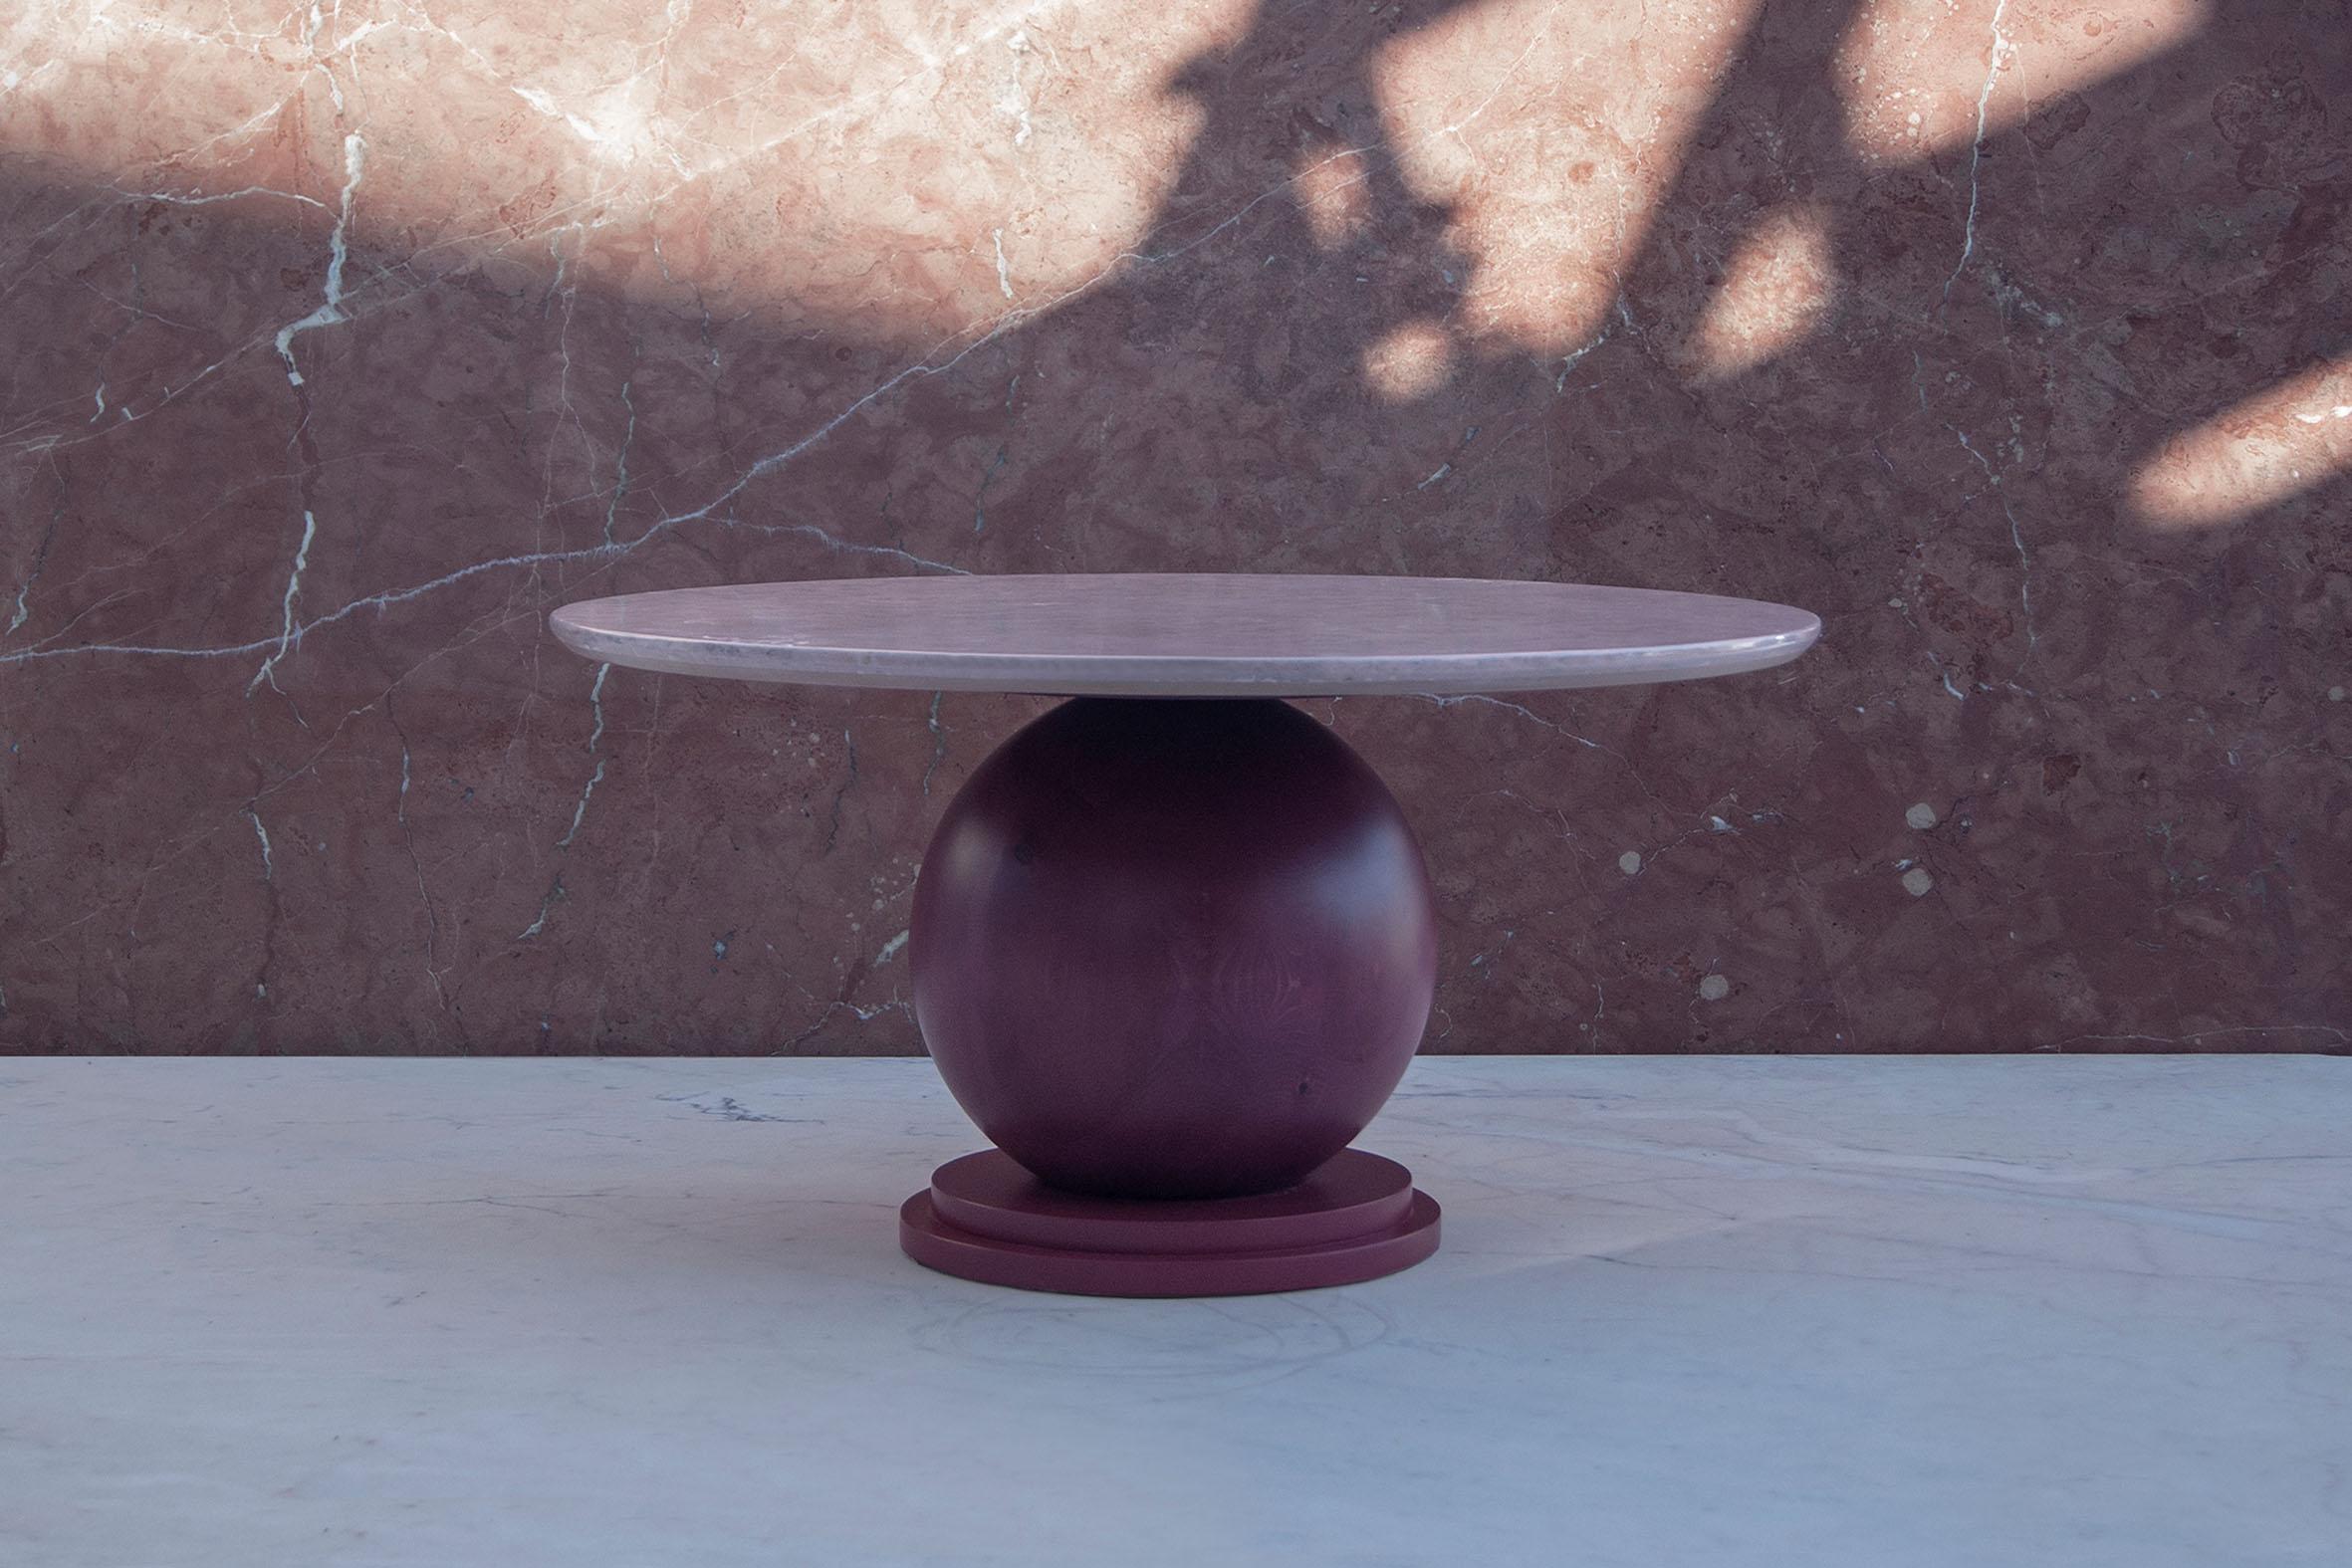 Sphere table by Studio Christinekalia
Dimensions: W 70 x D 70 x H 35 cm.
Materials: Wood, burl veneer.

Derived from the element of the sphere, this low wooden table piece plays with the idea of homogeneity in 360°. The piece combines three